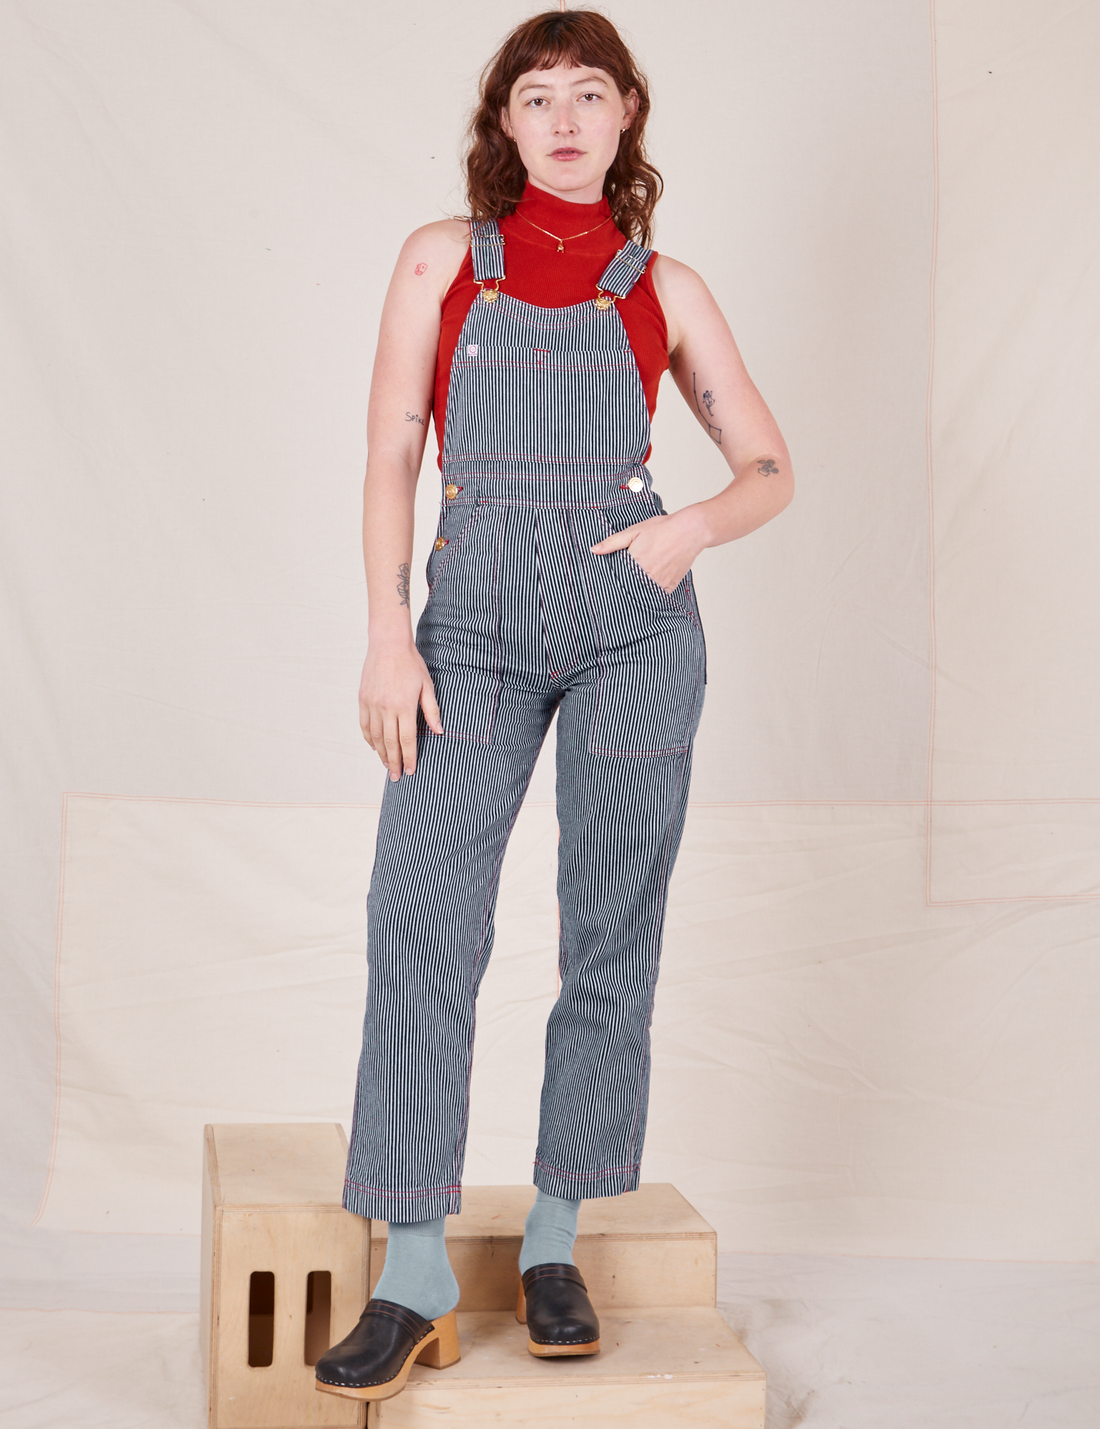 Alex is 5'8" and wearing P Railroad Stripe Denim Original Overalls paired with paprika Sleeveless Turtleneck